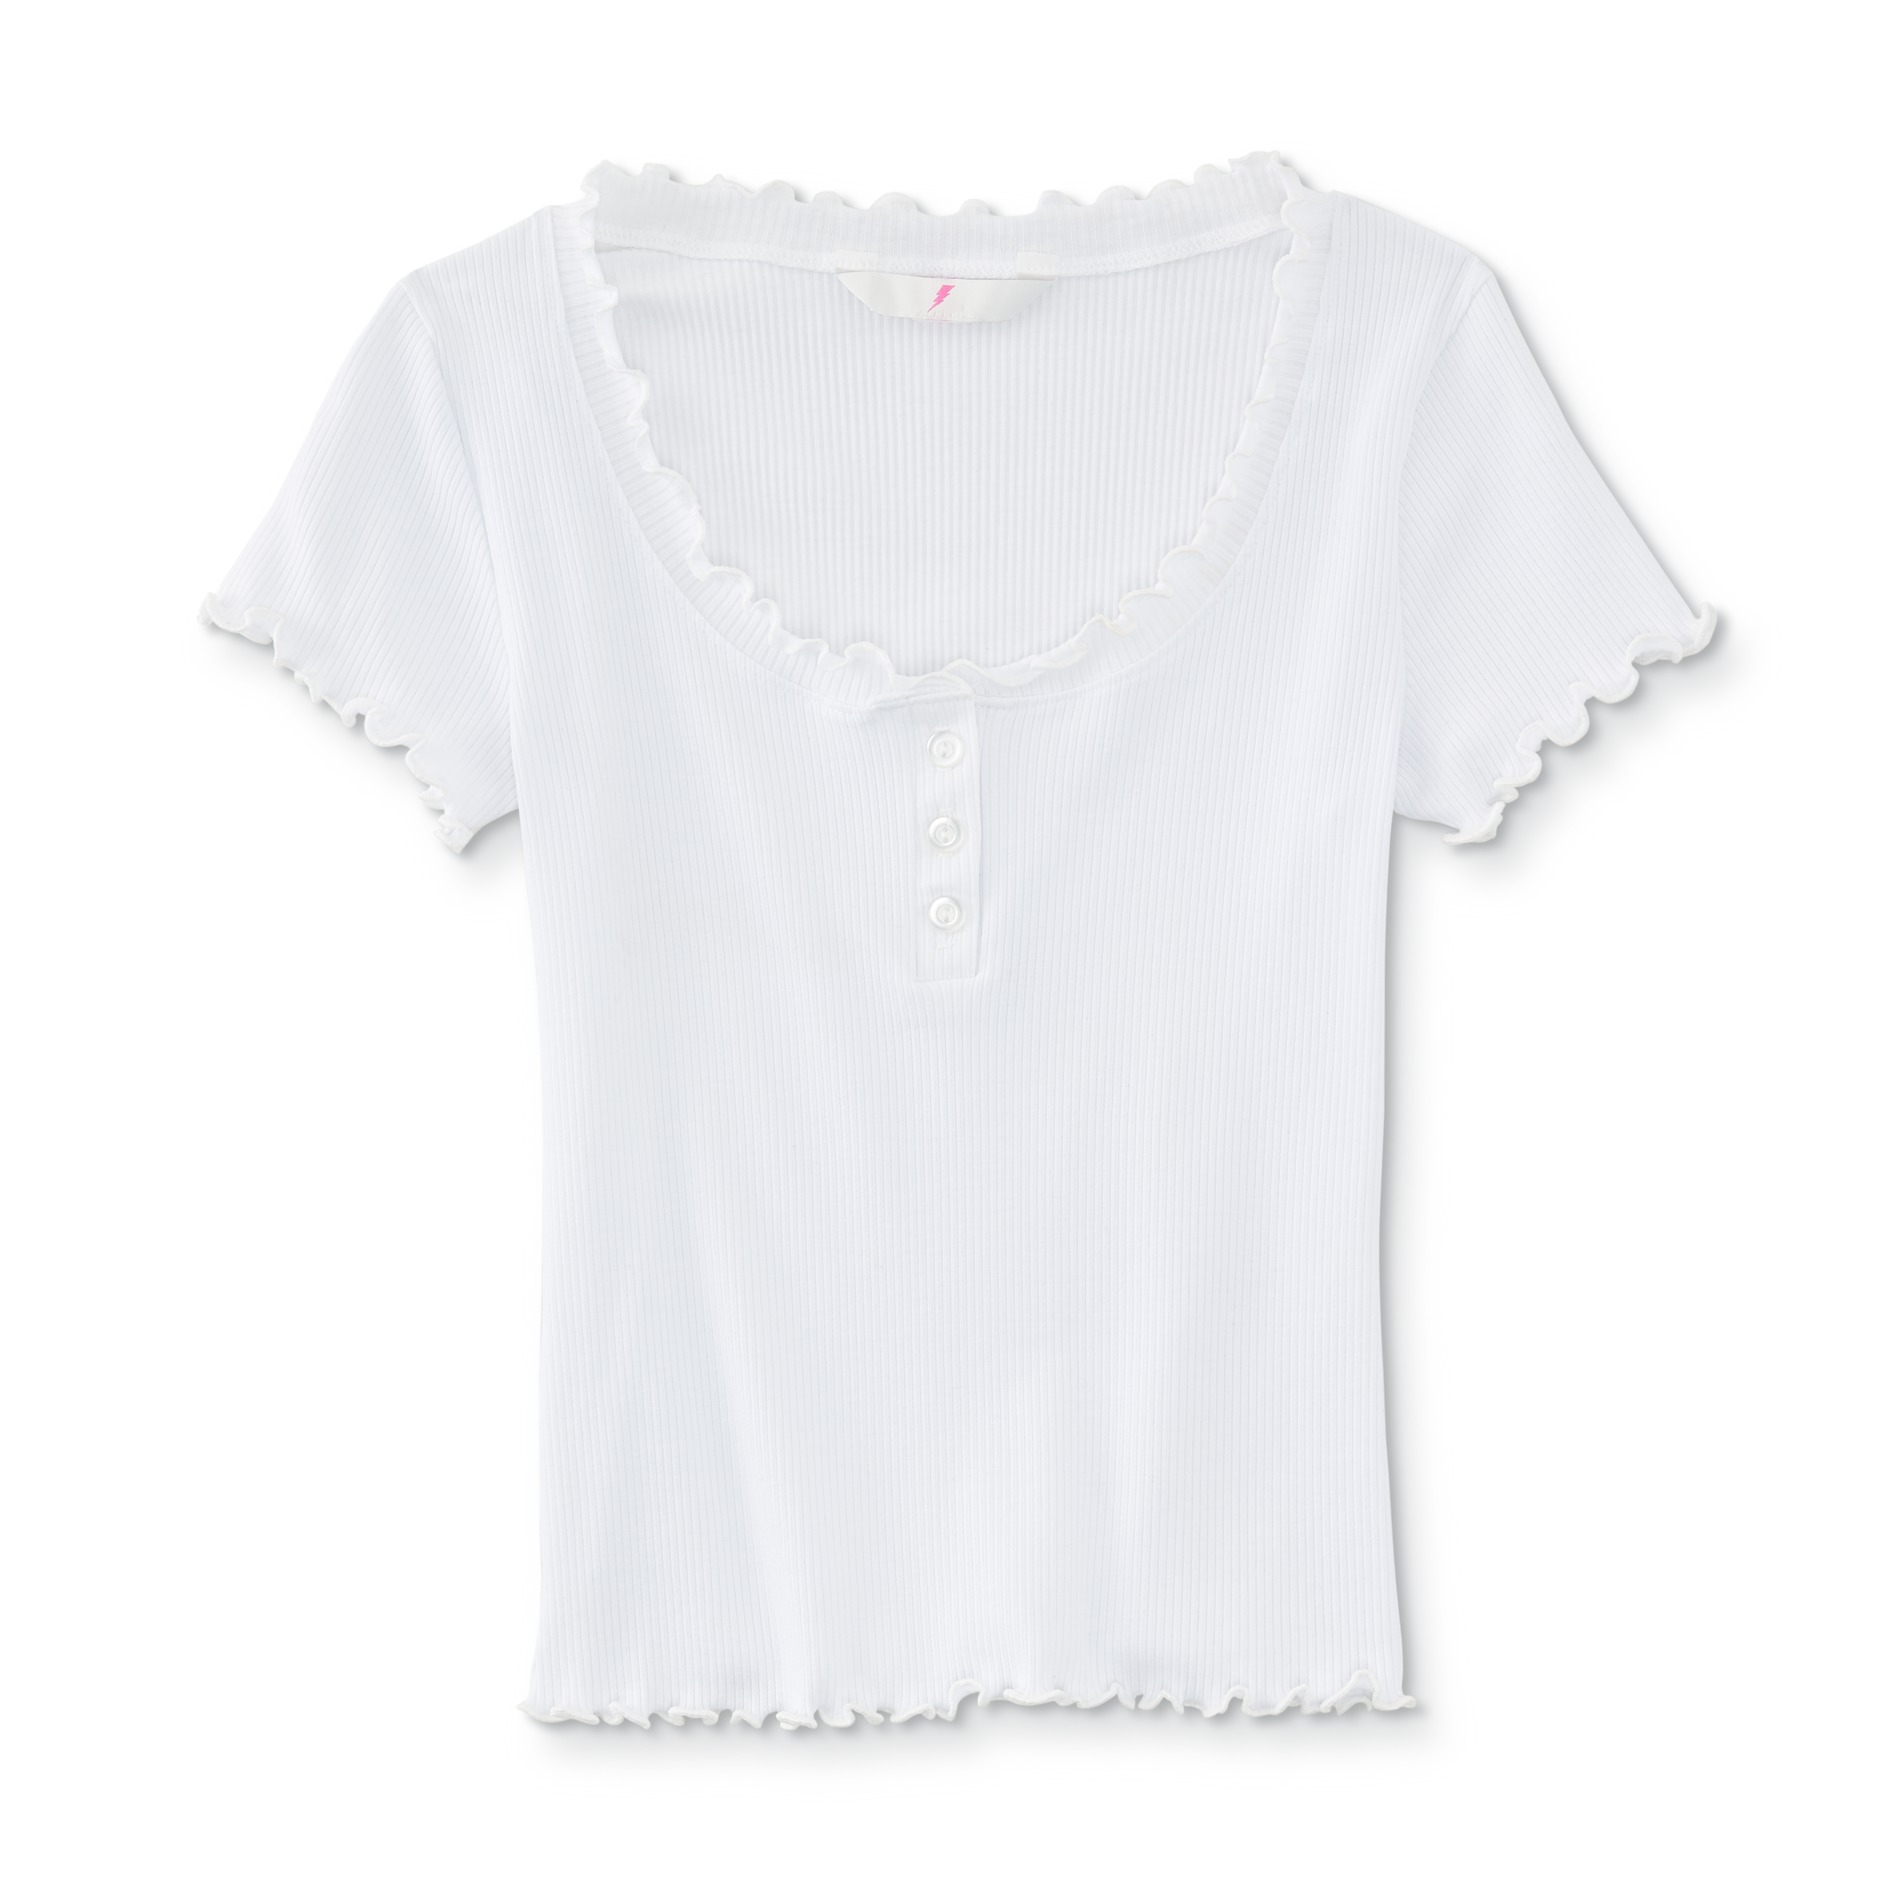 Amplify Juniors' Cropped Henley